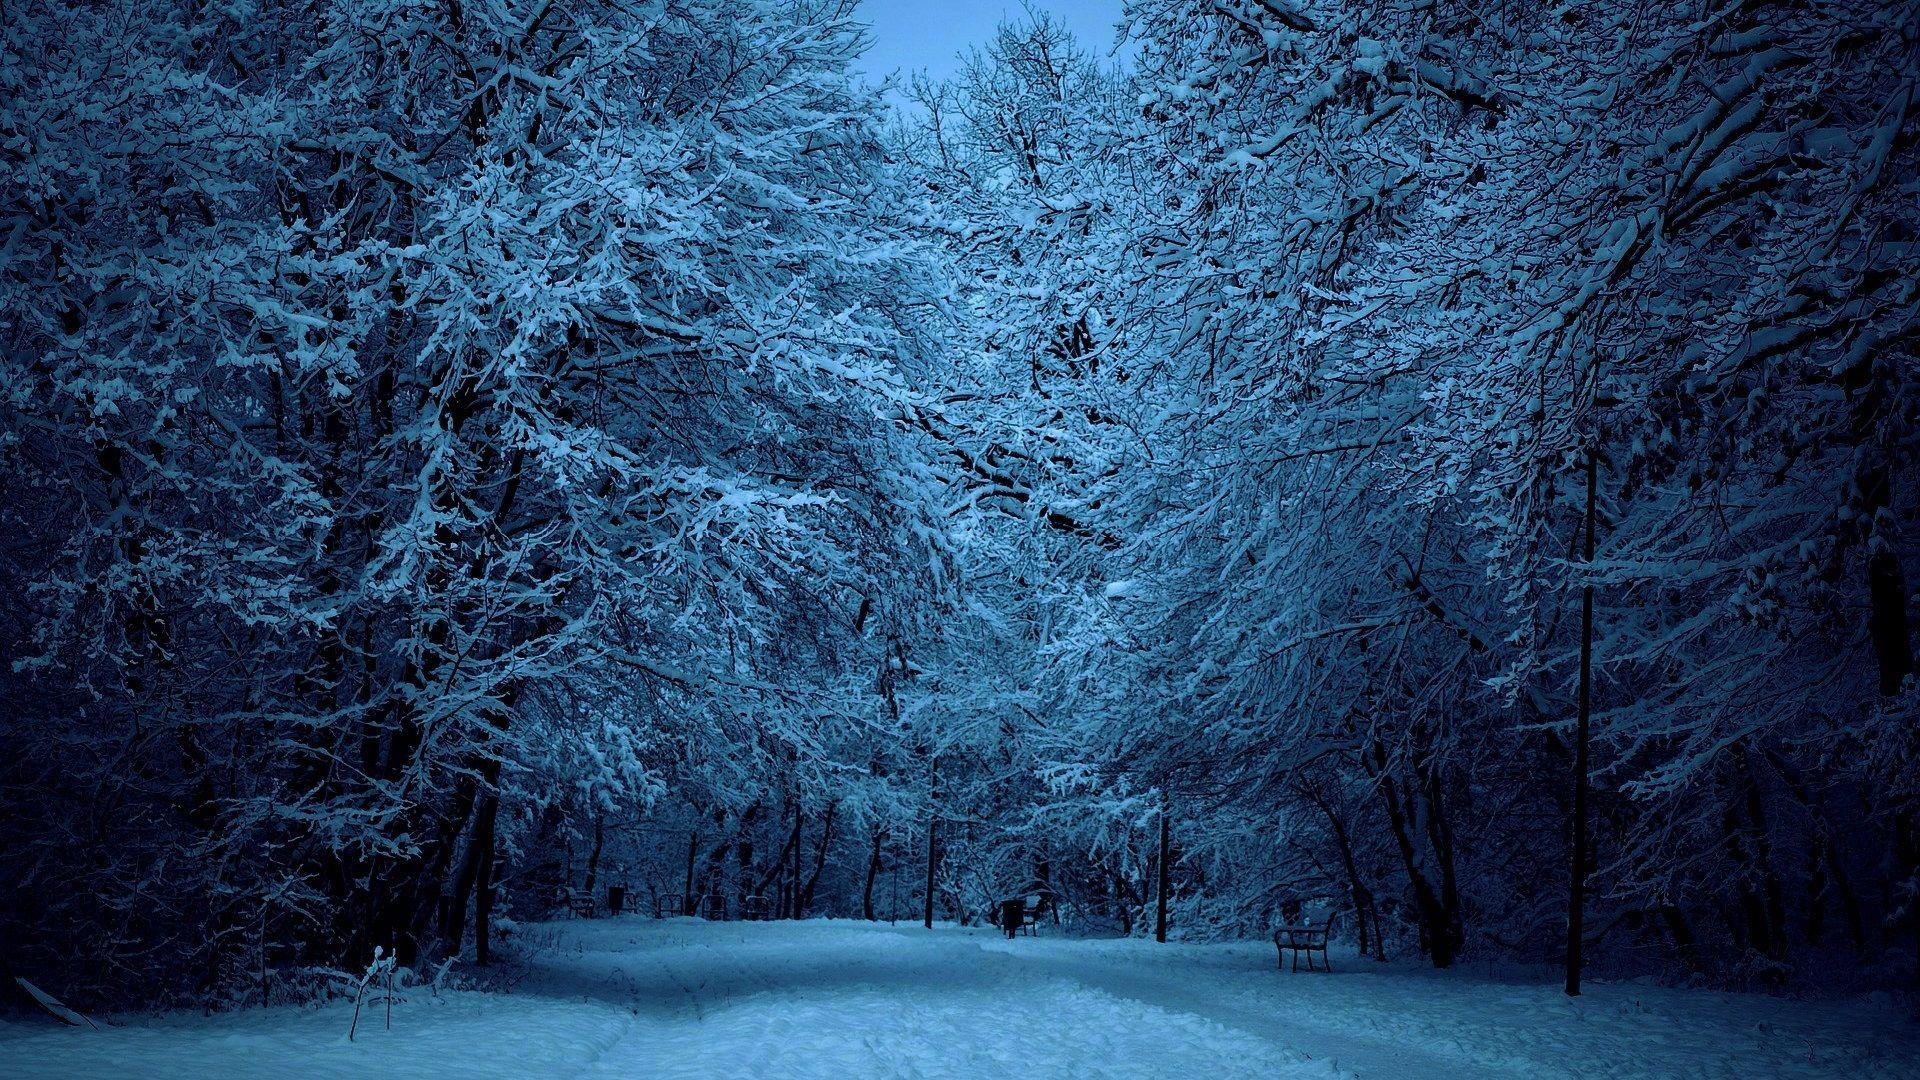 Night Winter Forest Wallpapers Wallpaper Cave